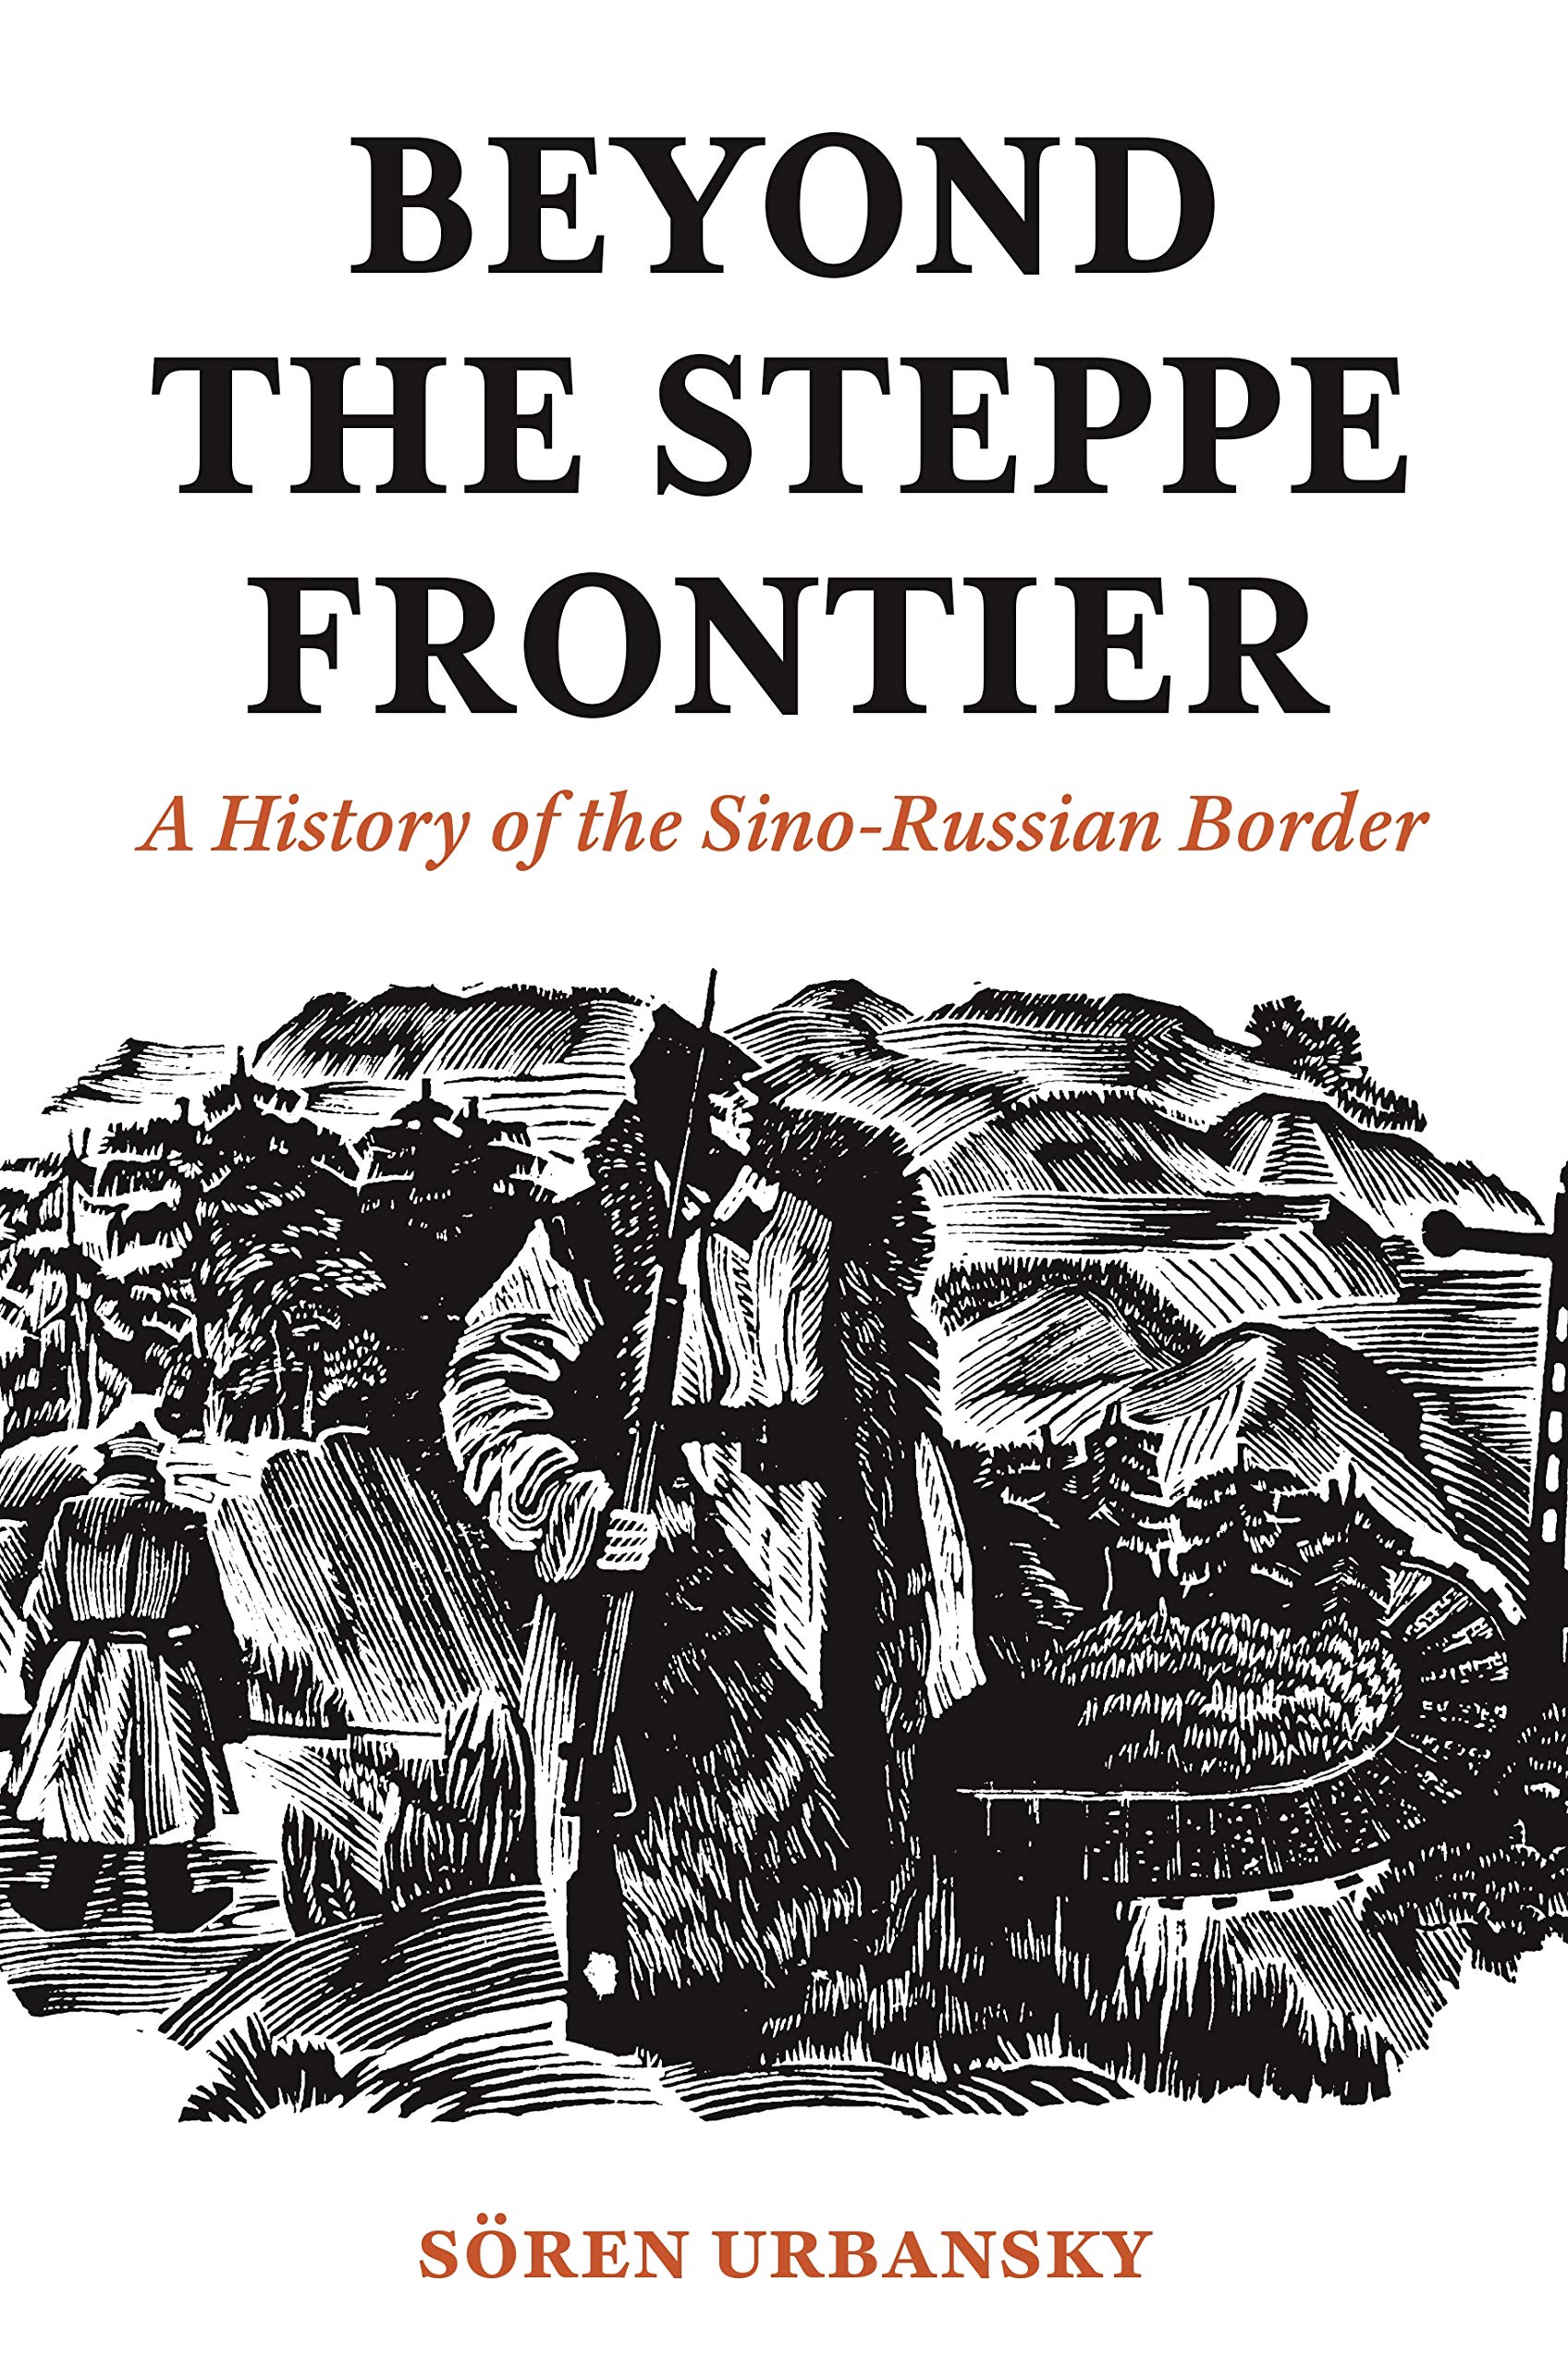 Beyond the Steppe Frontier A History of the Sino-Russian Border